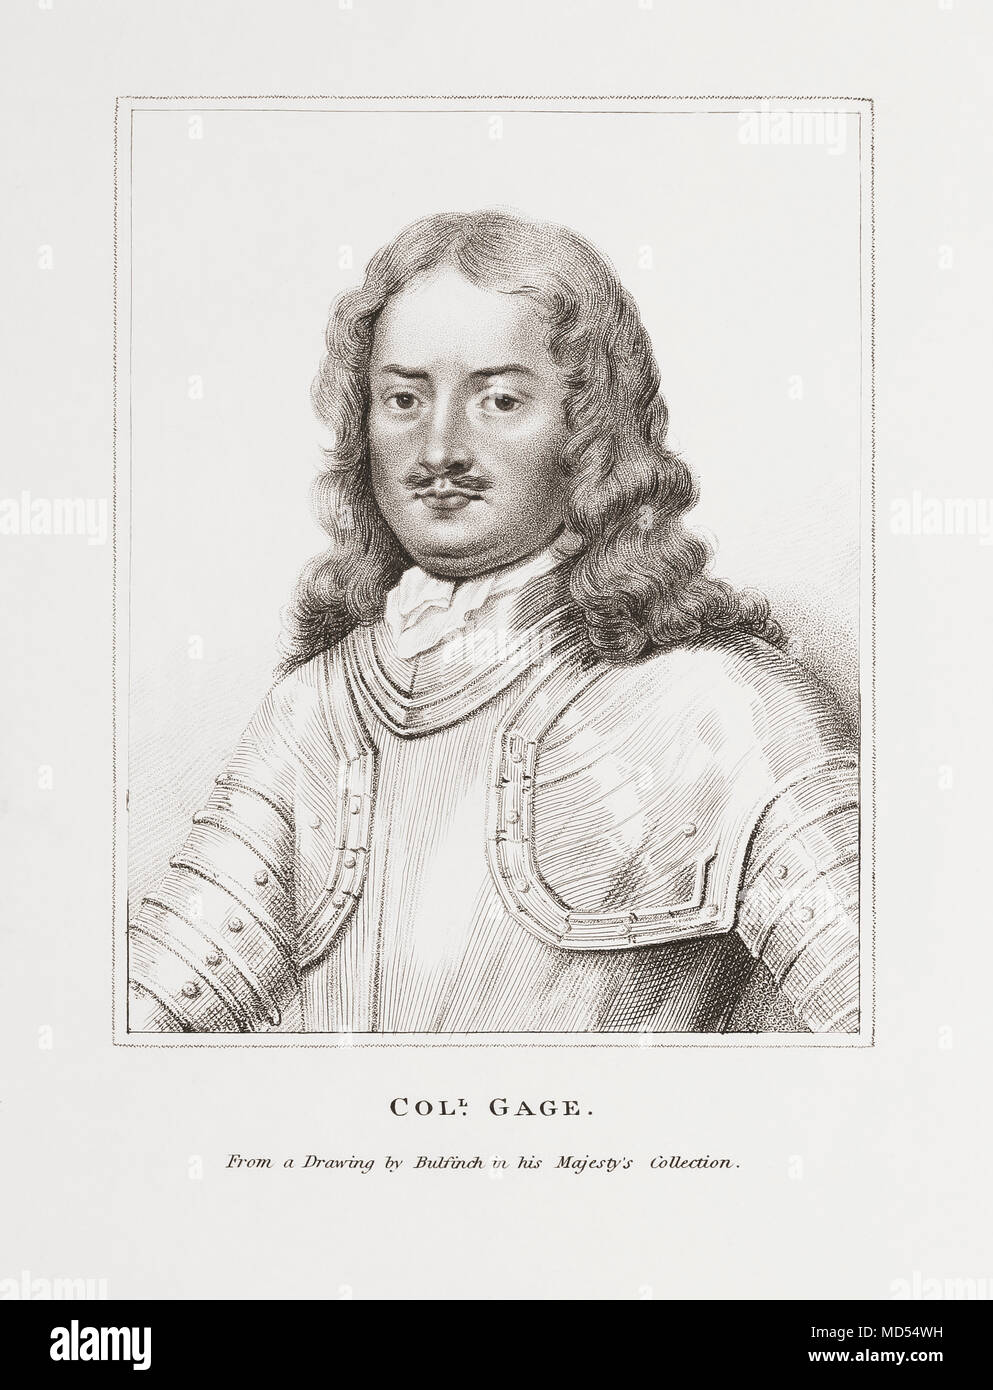 Sir Henry Gage, 1597-1645.  Royalist officer in English Civil War   From Woodburn’s Gallery of Rare Portraits, published 1816. Stock Photo